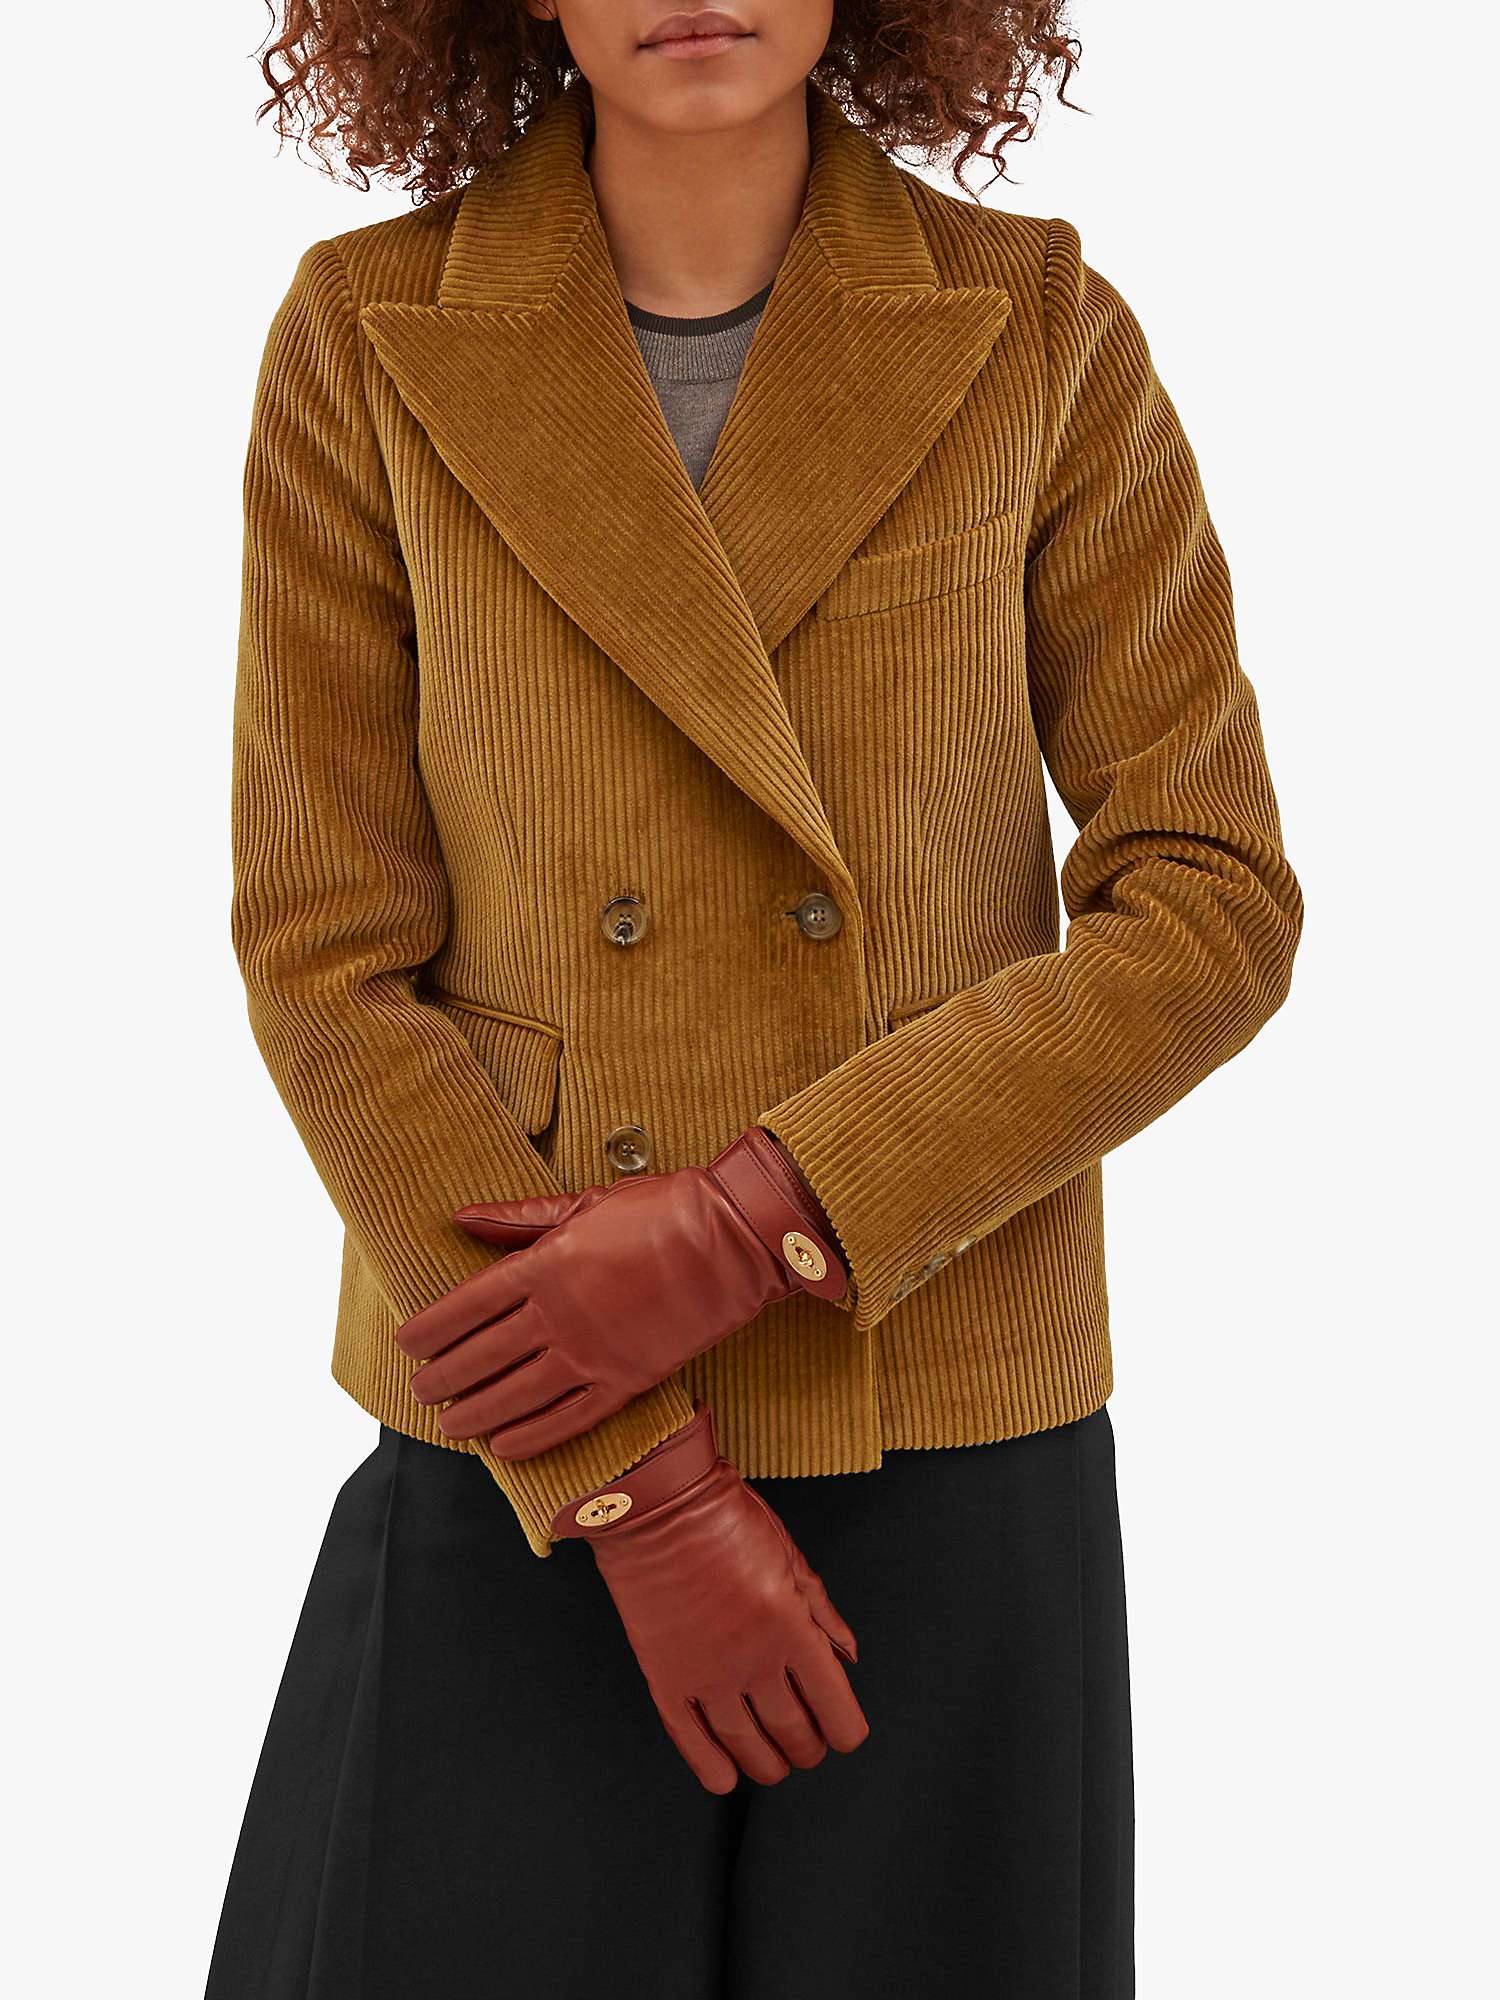 Buy Mulberry Women's Darley Nappa Leather Gloves Online at johnlewis.com